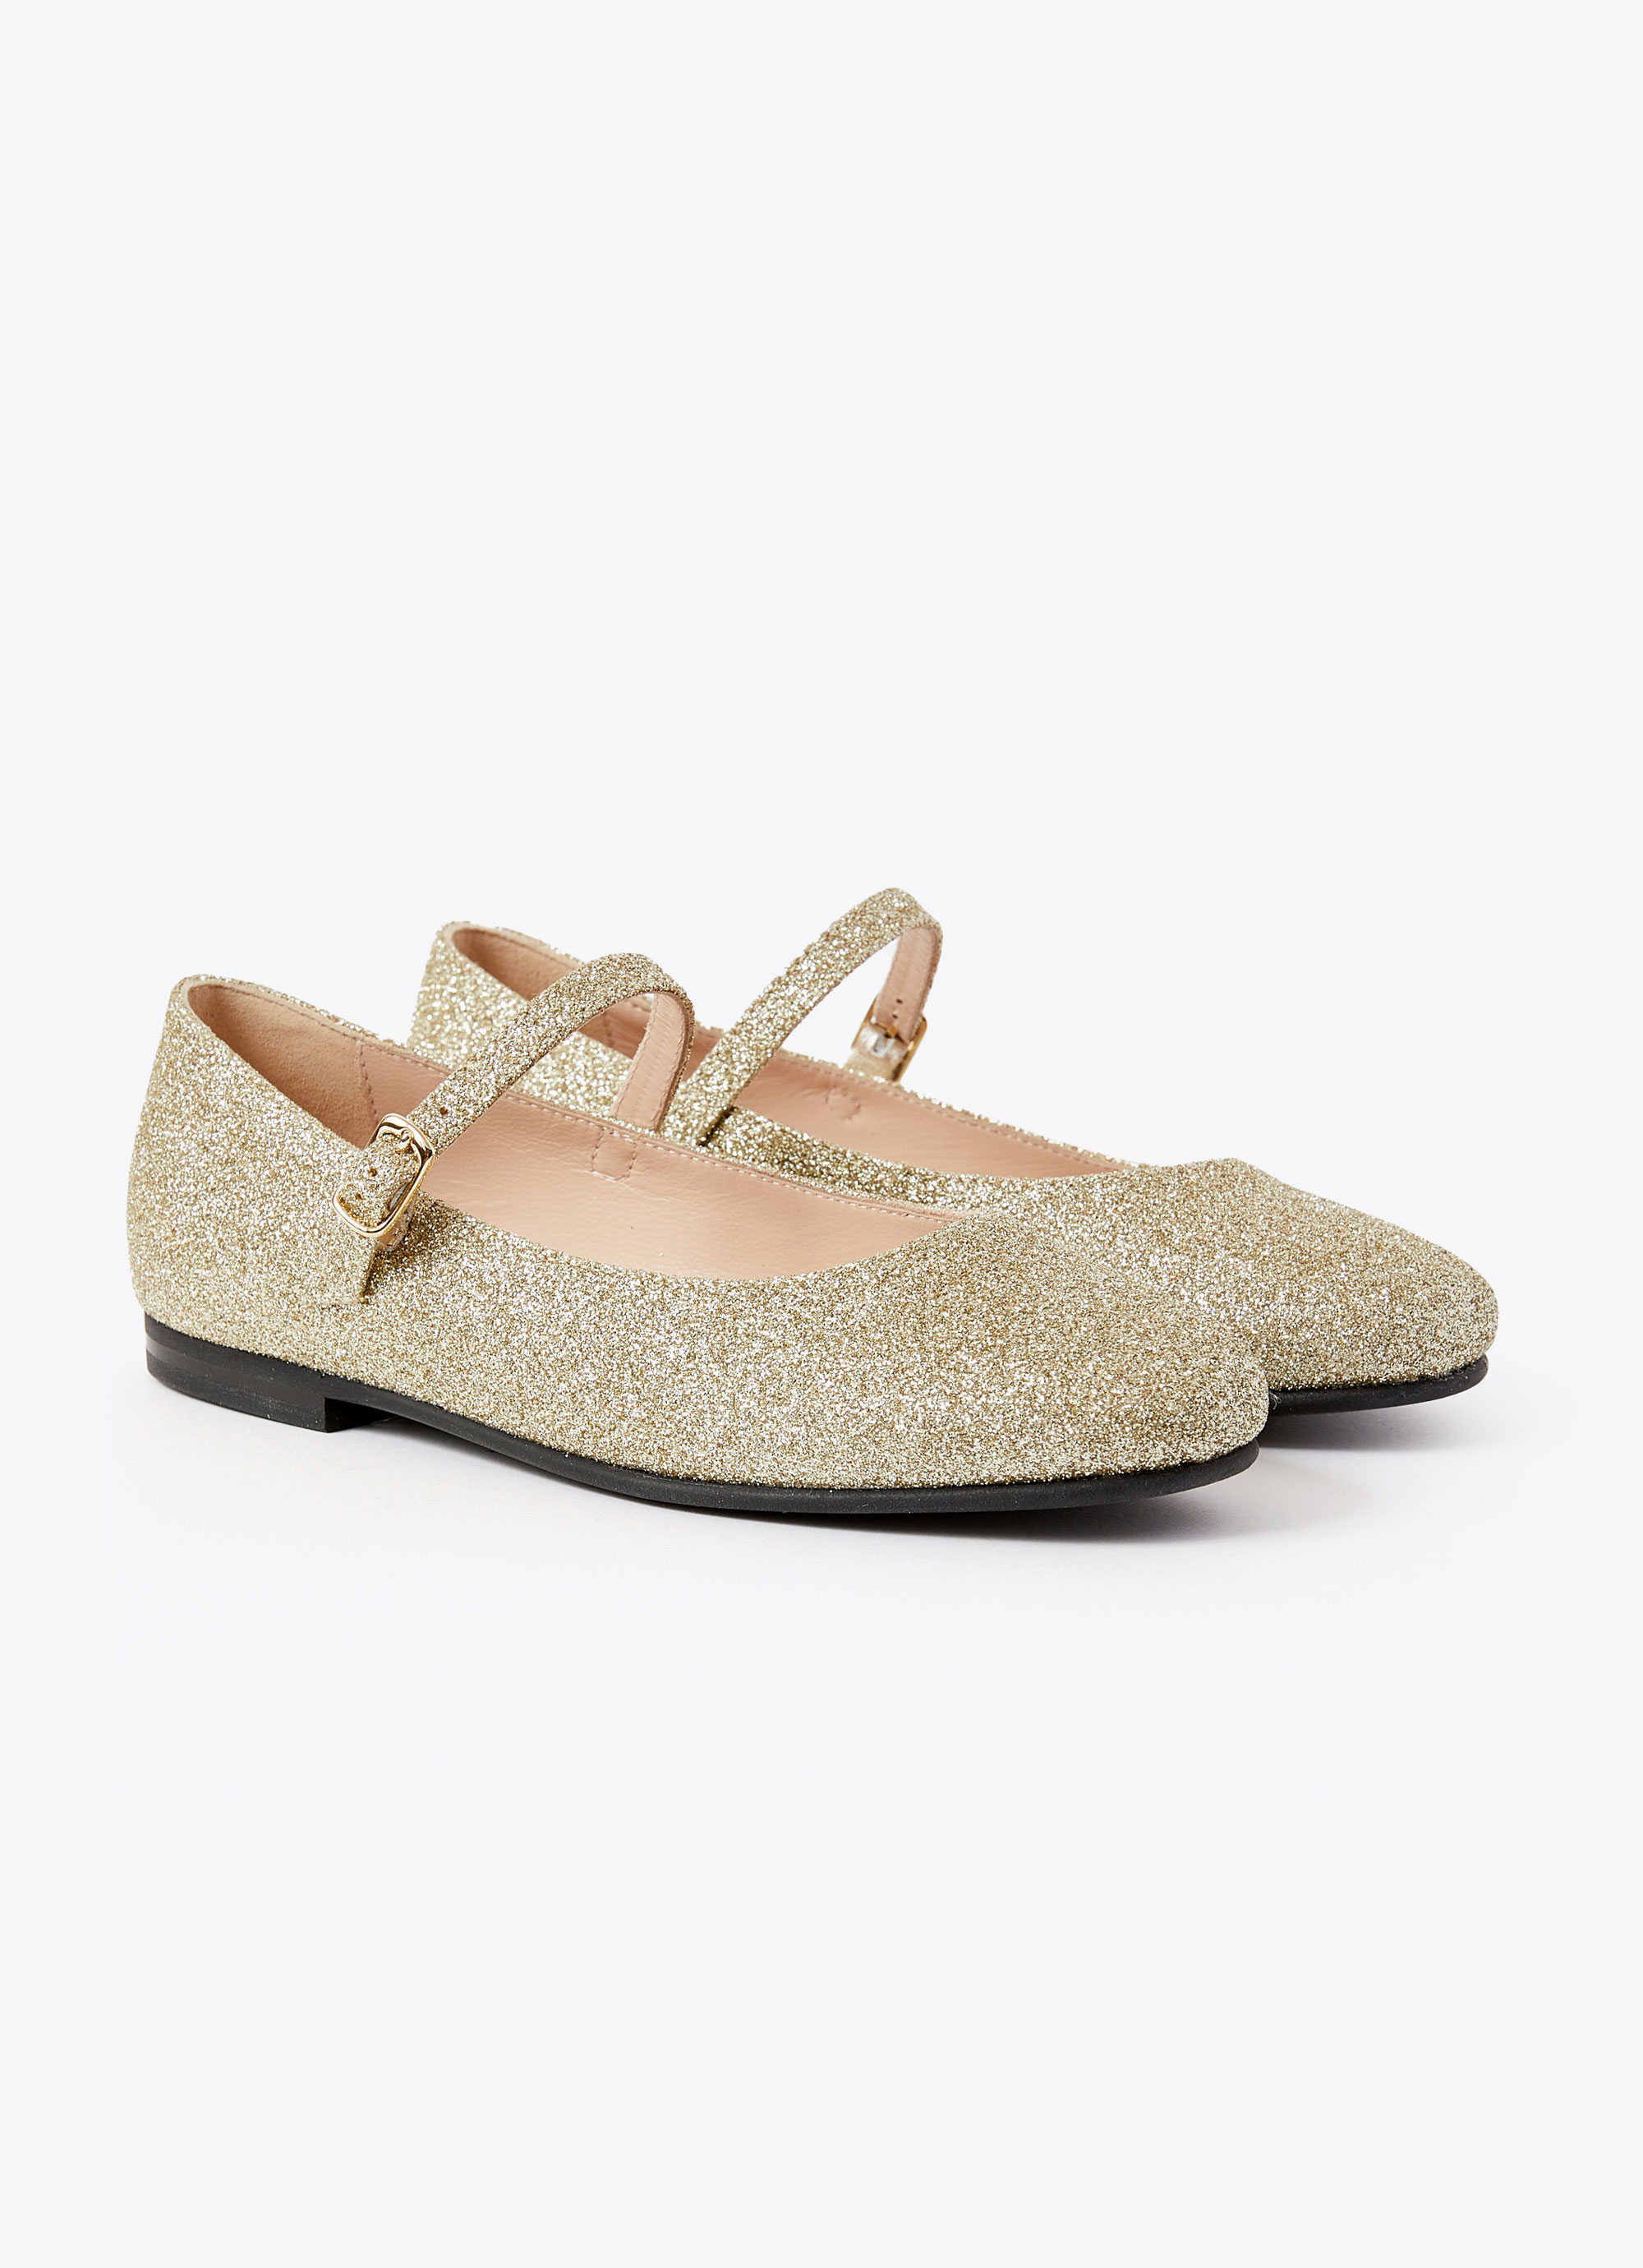 Gold glittered ballet flats - Shoes - Il Gufo